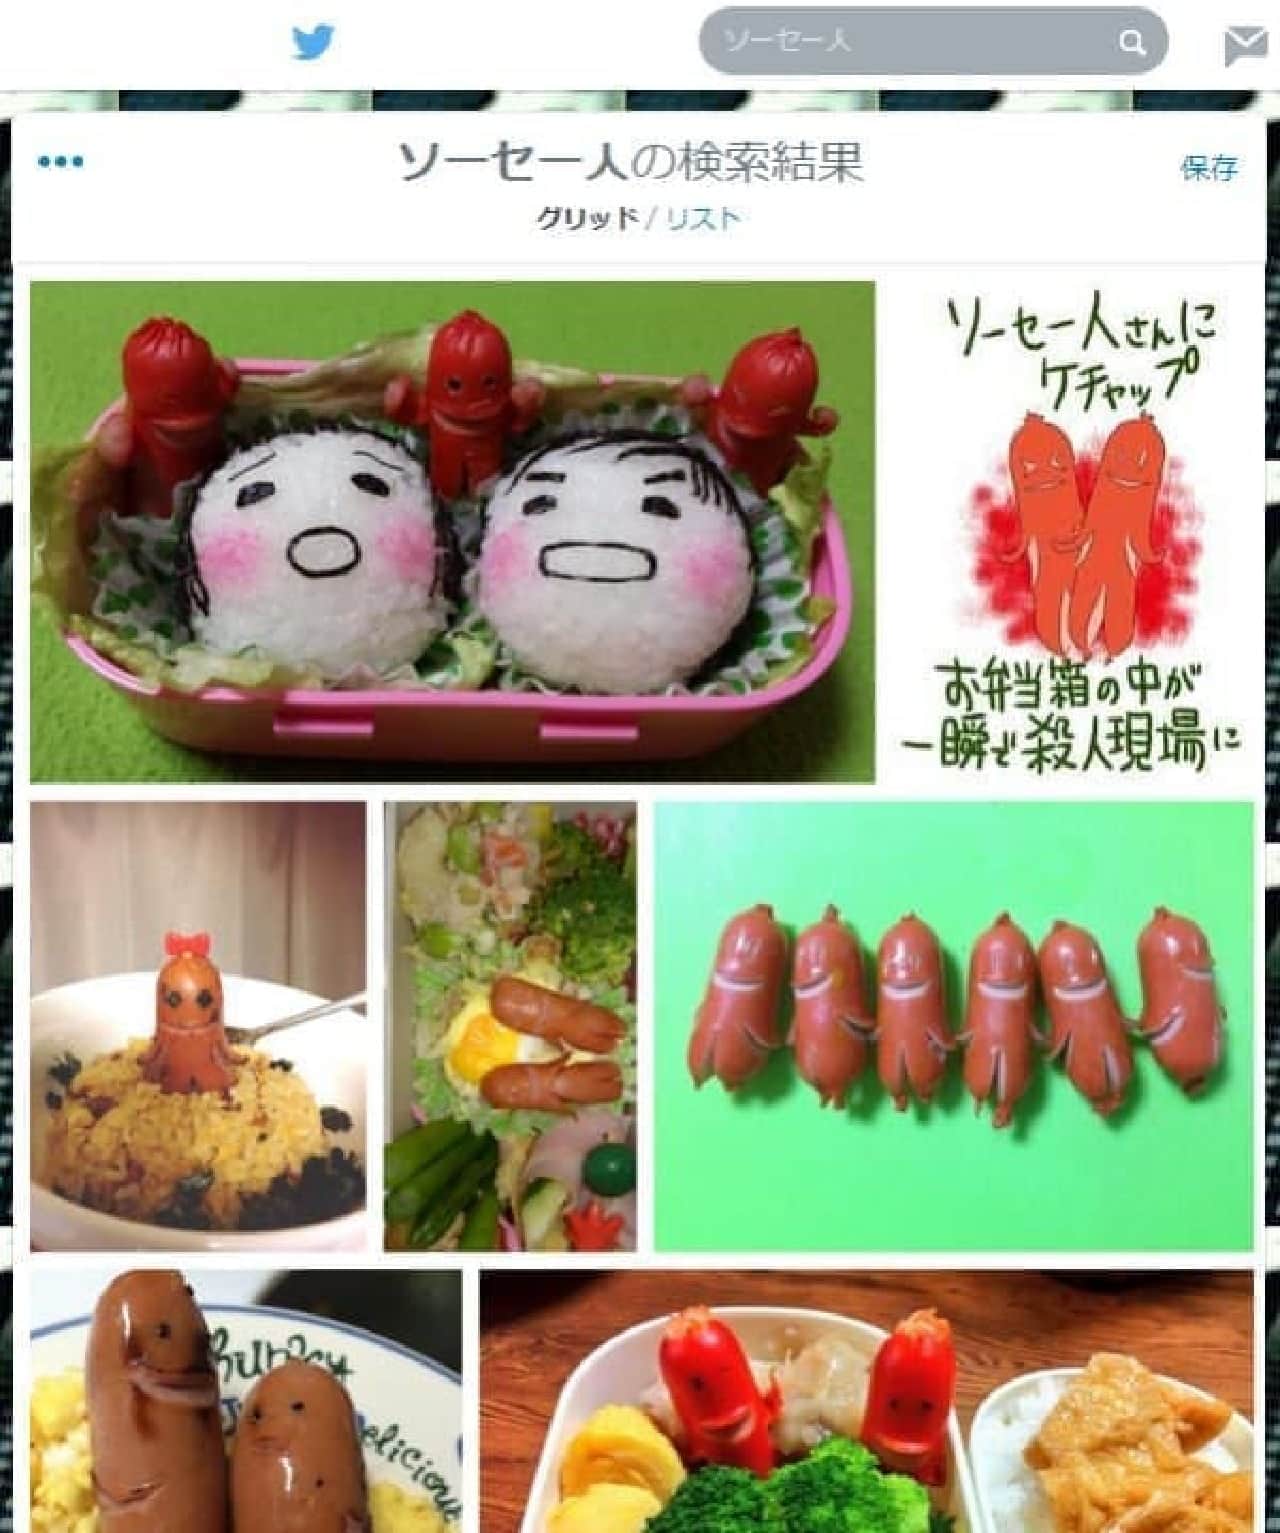 Twitter image search results for "Souseijin"